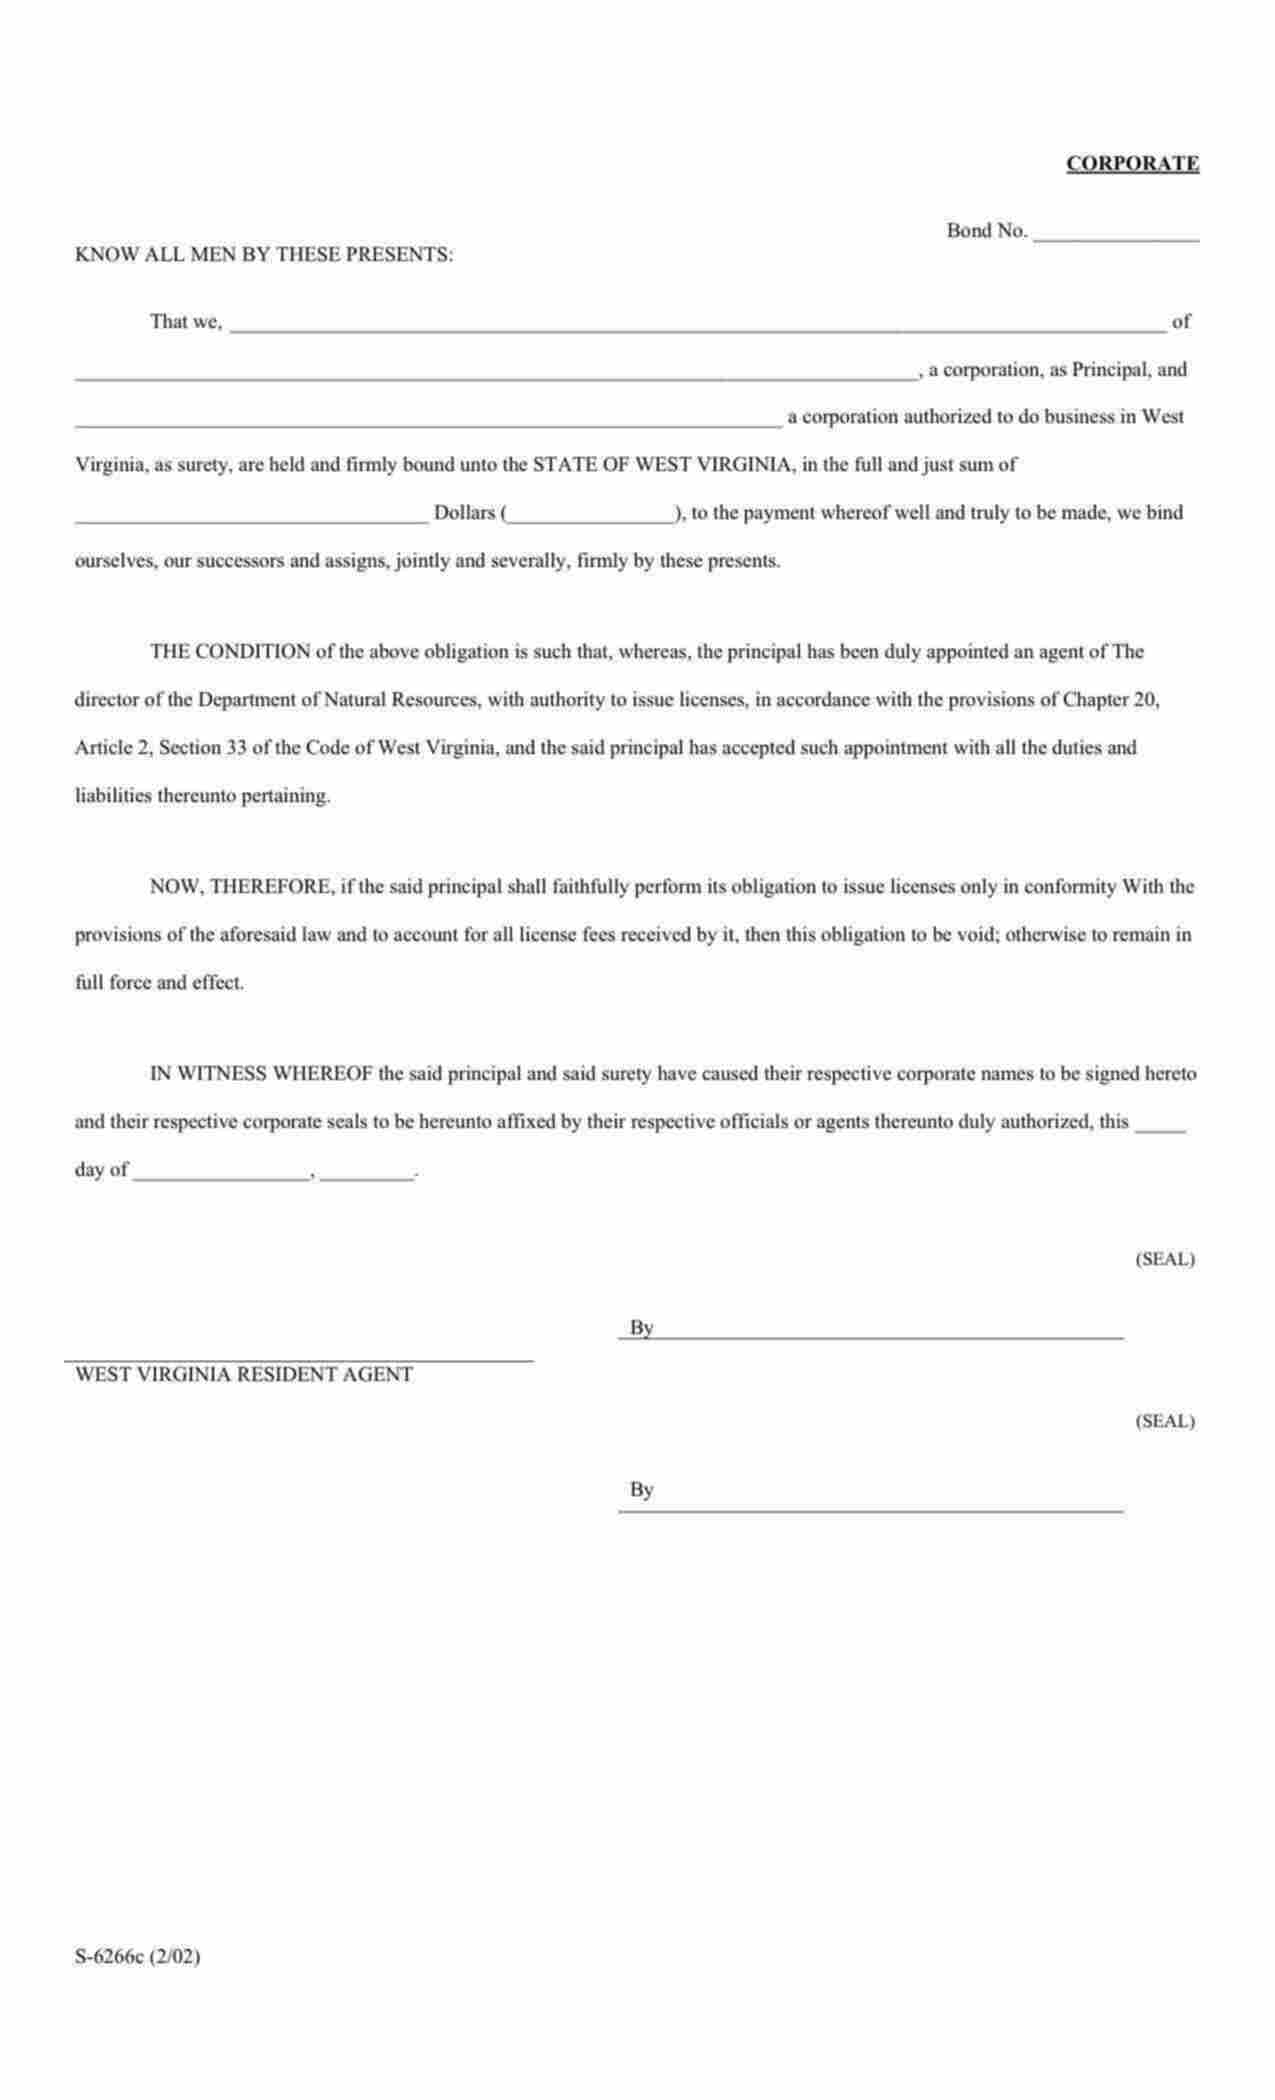 West Virginia Hunting/Fishing License (Corporate) Bond Form